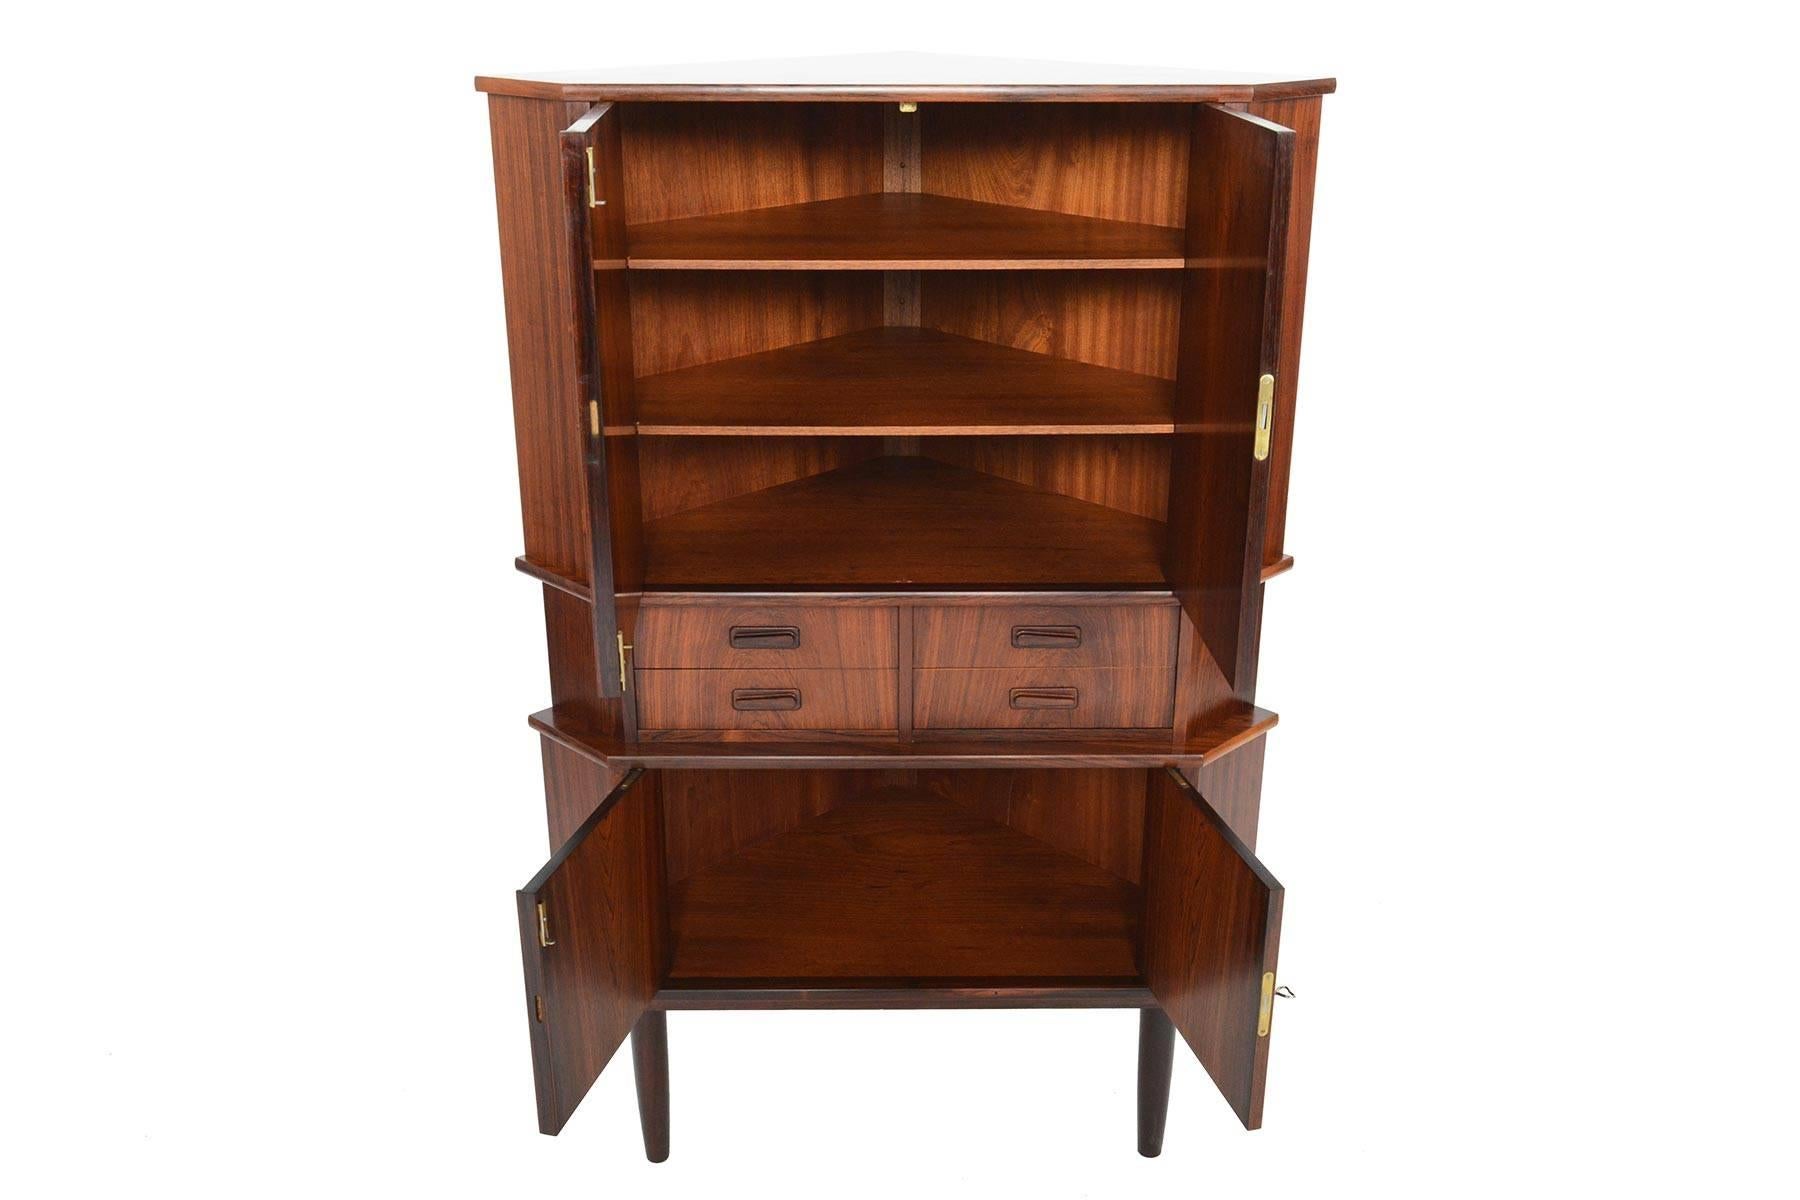 This Danish modern Brazilian rosewood corner cabinet is the perfect storage solution for any home. This piece offers two cabinet spaces and a bank of four drawers with atomic pulls nestled in the centre. Cabinets unlock to reveal open storage with